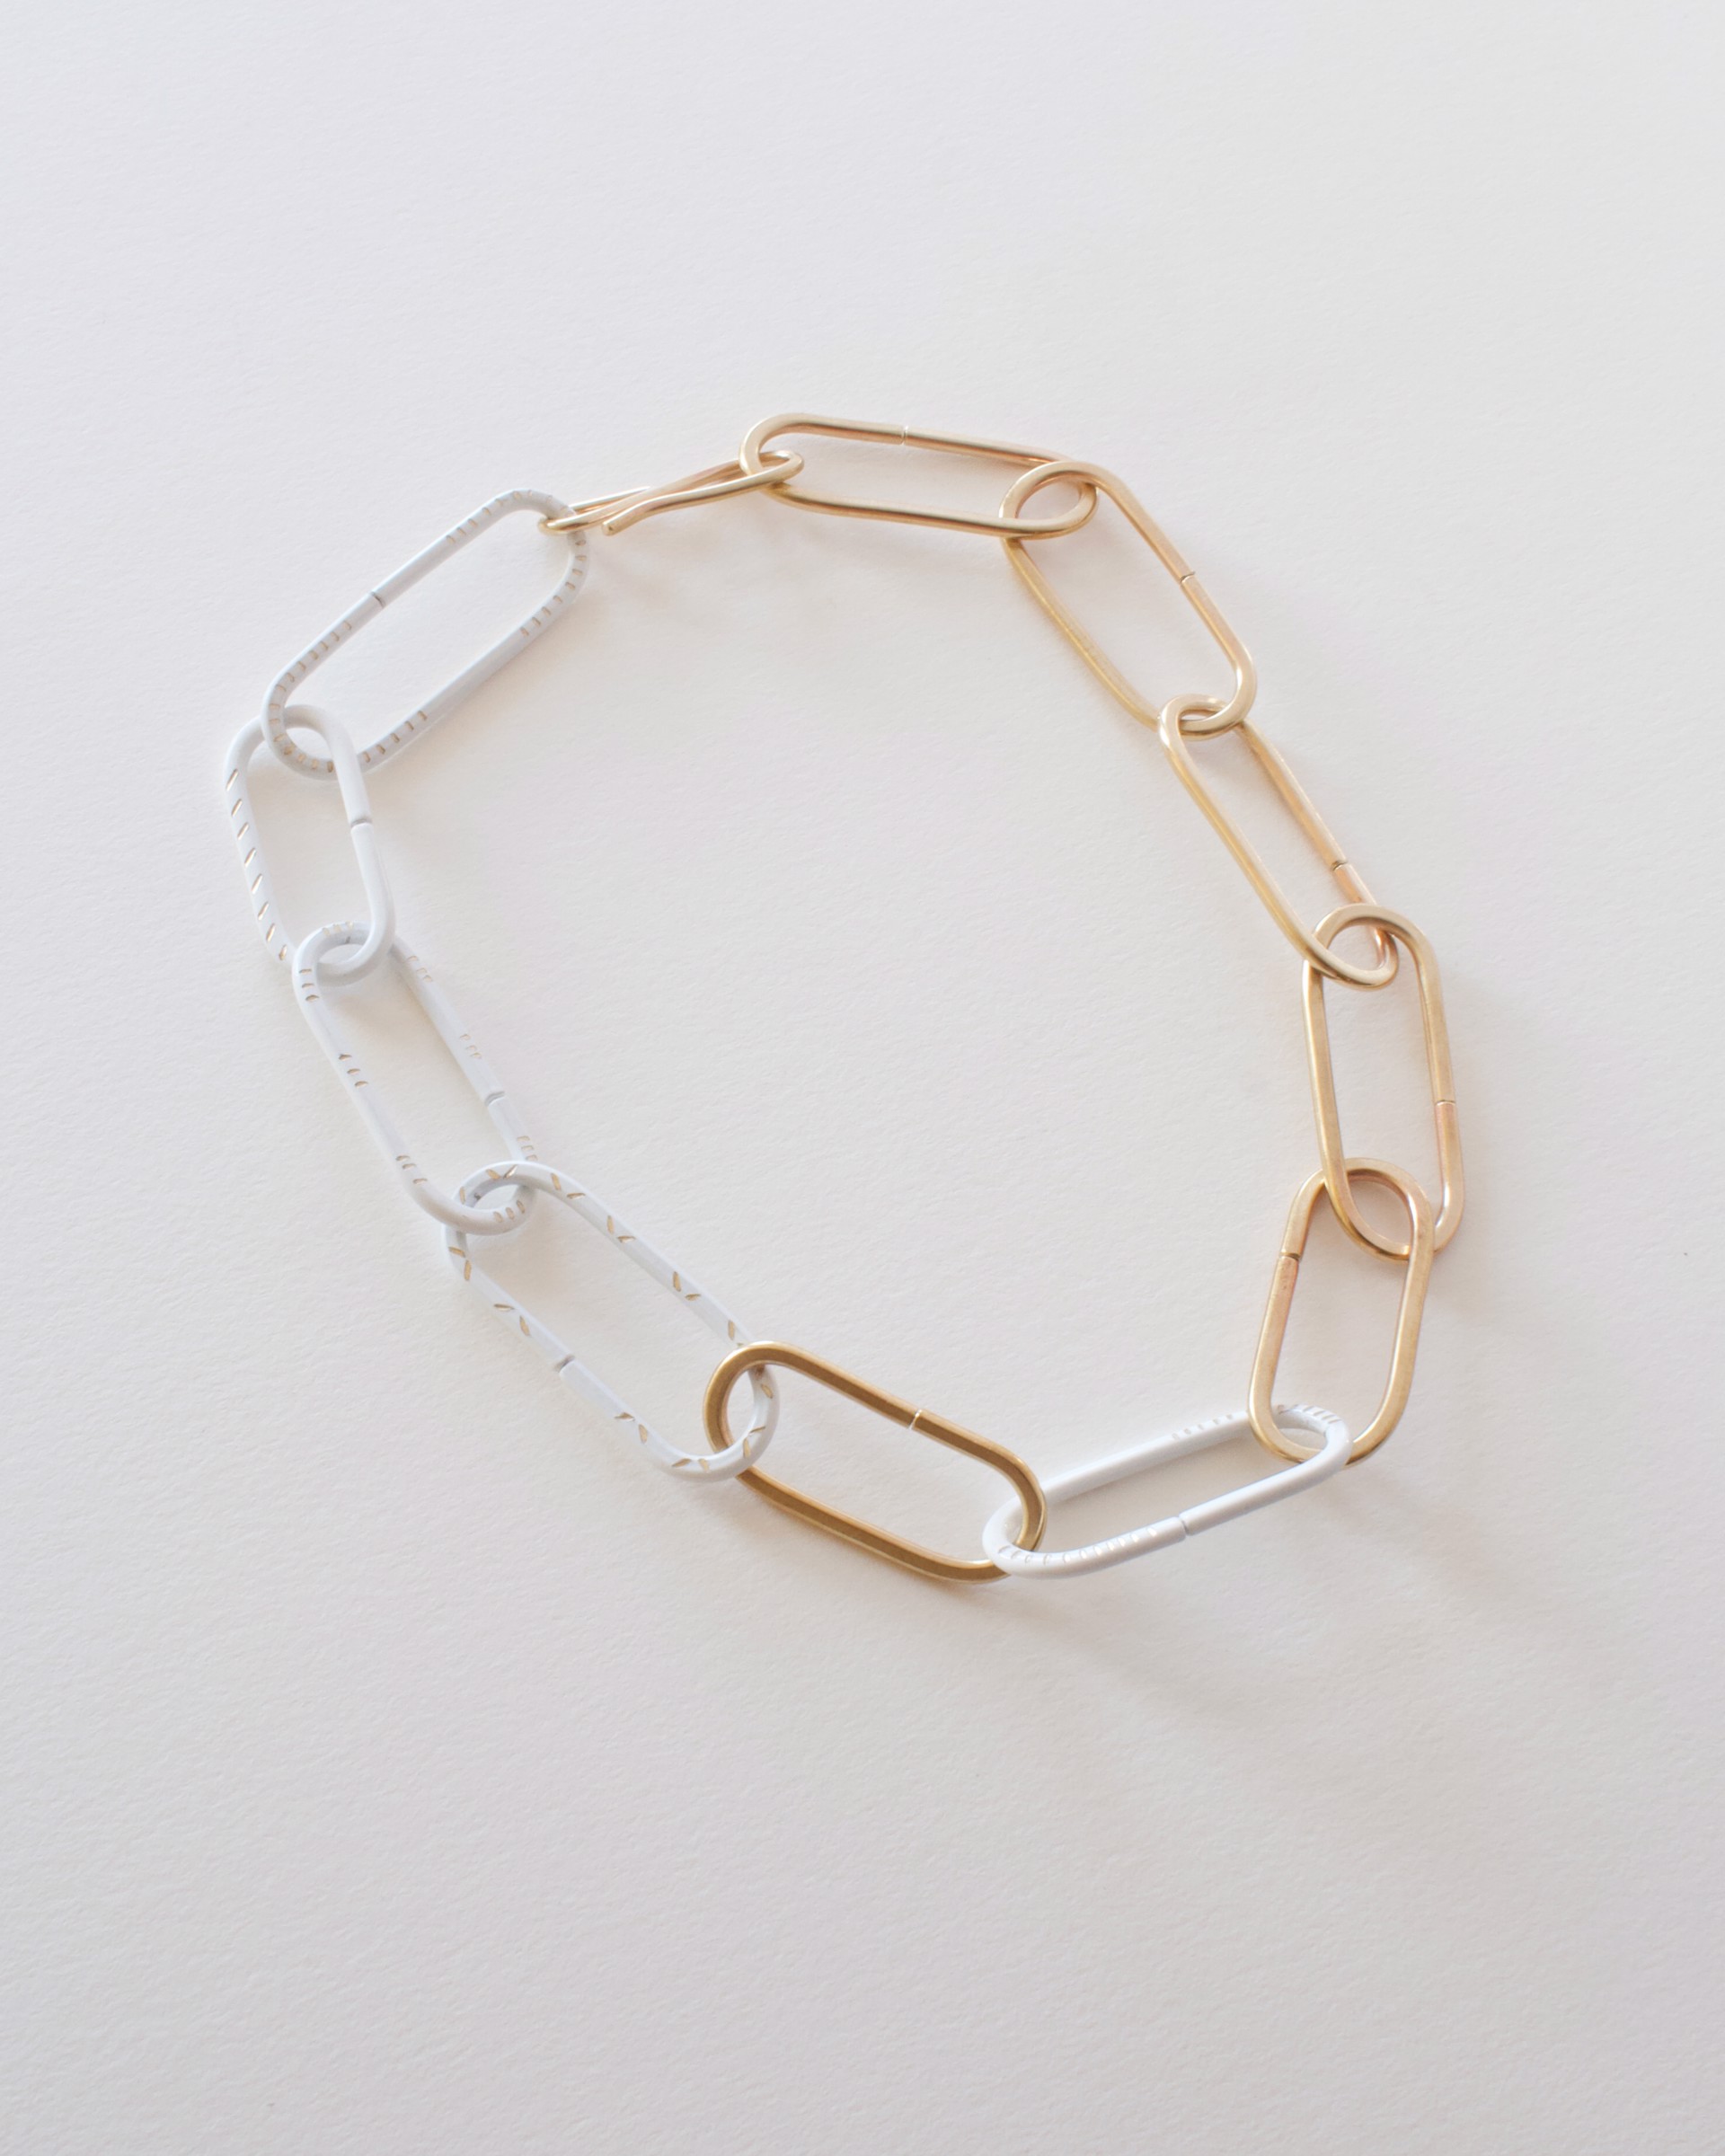 Detail Chain - Brass + White by Audrey Laine